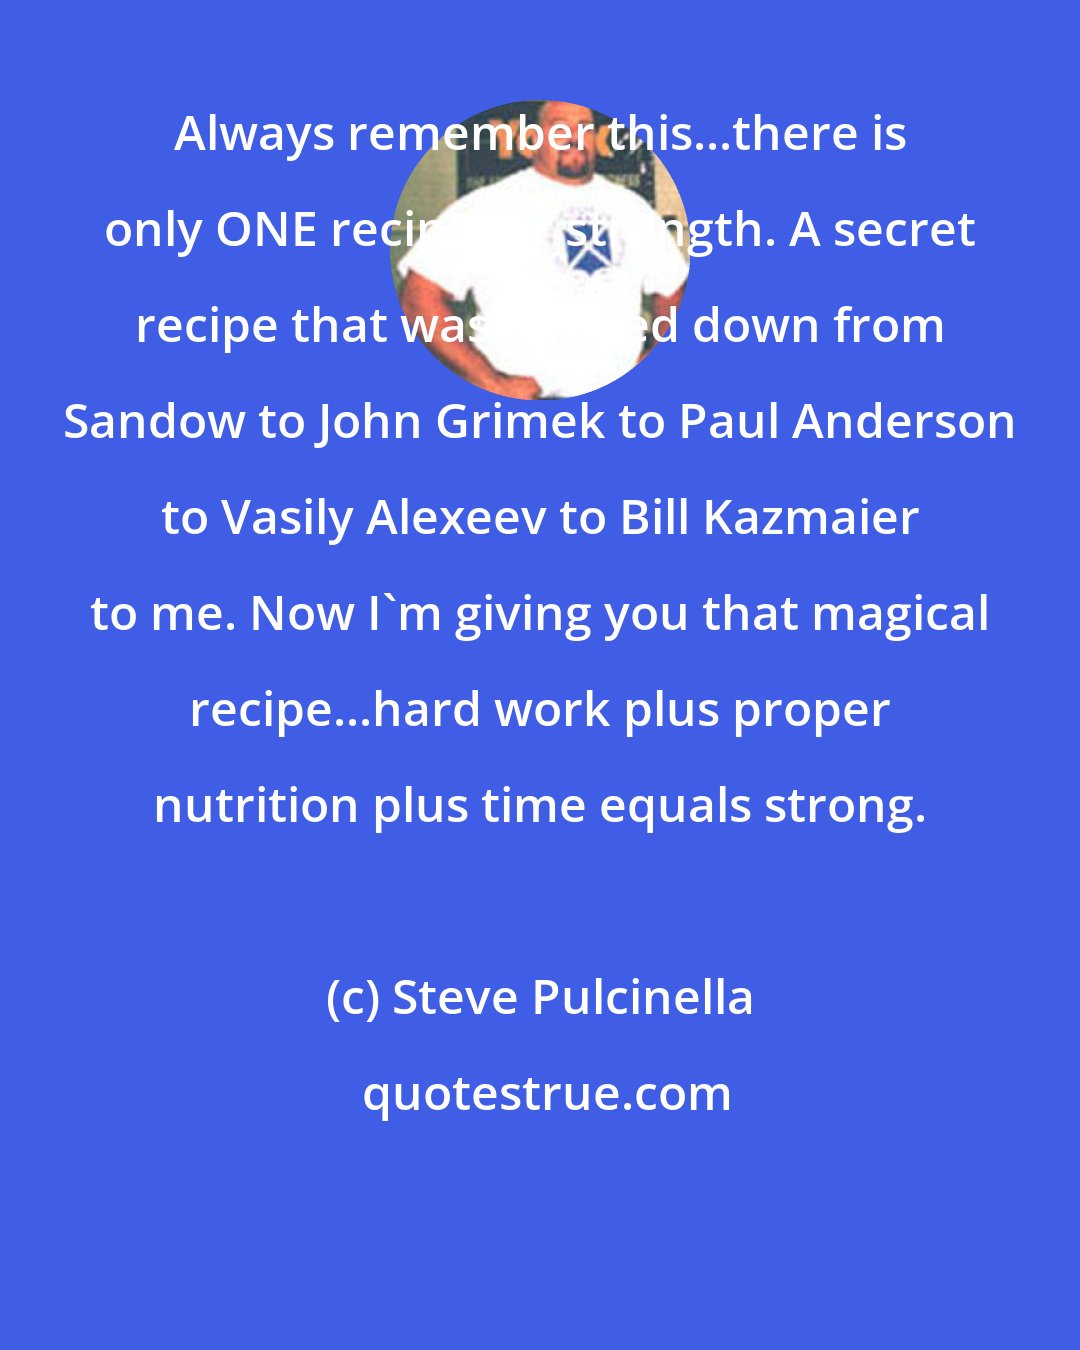 Steve Pulcinella: Always remember this...there is only ONE recipe for strength. A secret recipe that was handed down from Sandow to John Grimek to Paul Anderson to Vasily Alexeev to Bill Kazmaier to me. Now I'm giving you that magical recipe...hard work plus proper nutrition plus time equals strong.